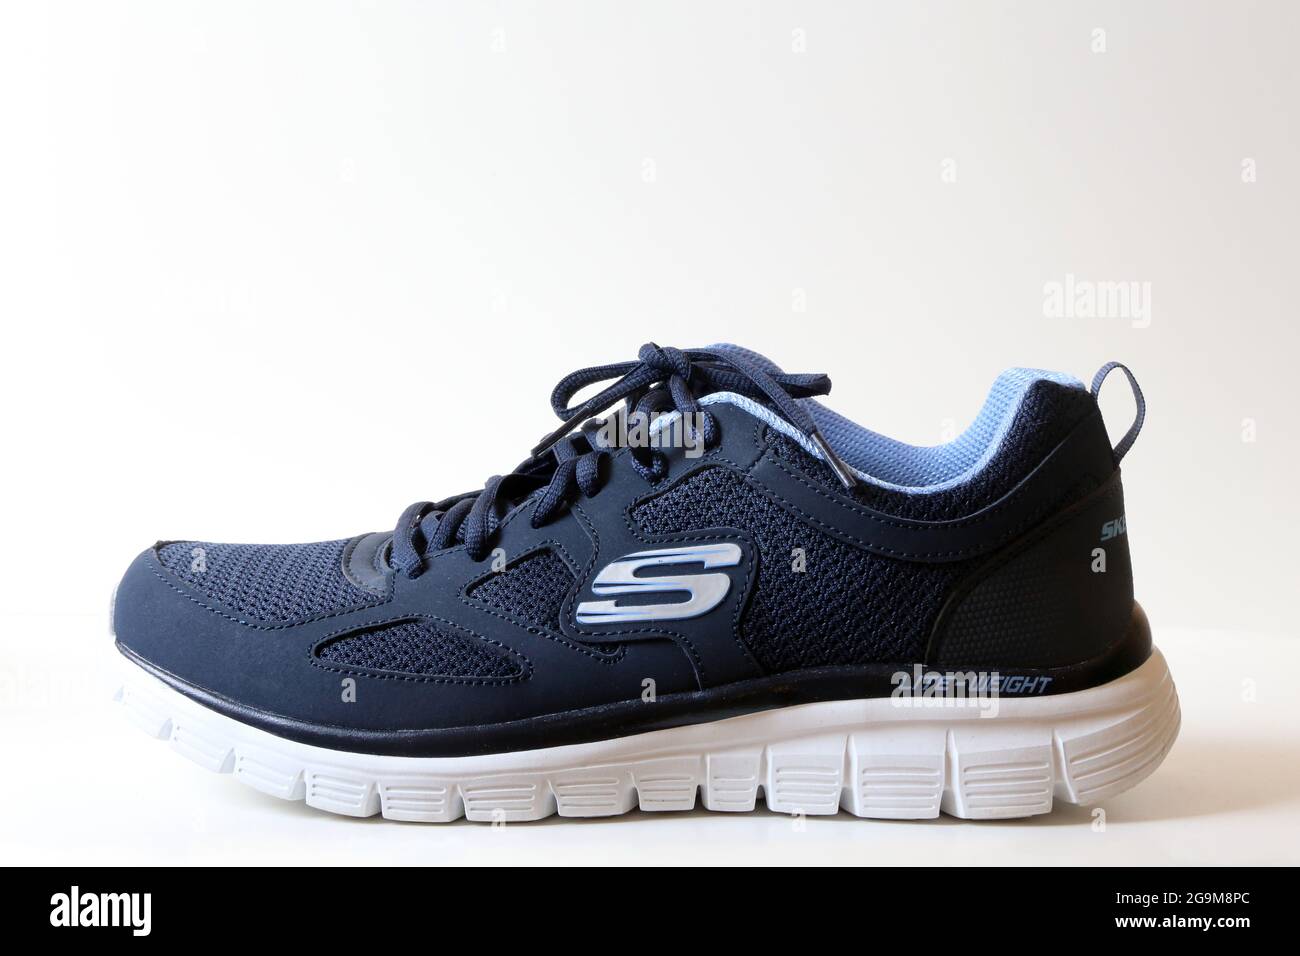 Skechers brand sneakers cropped against white background Stock Photo - Alamy